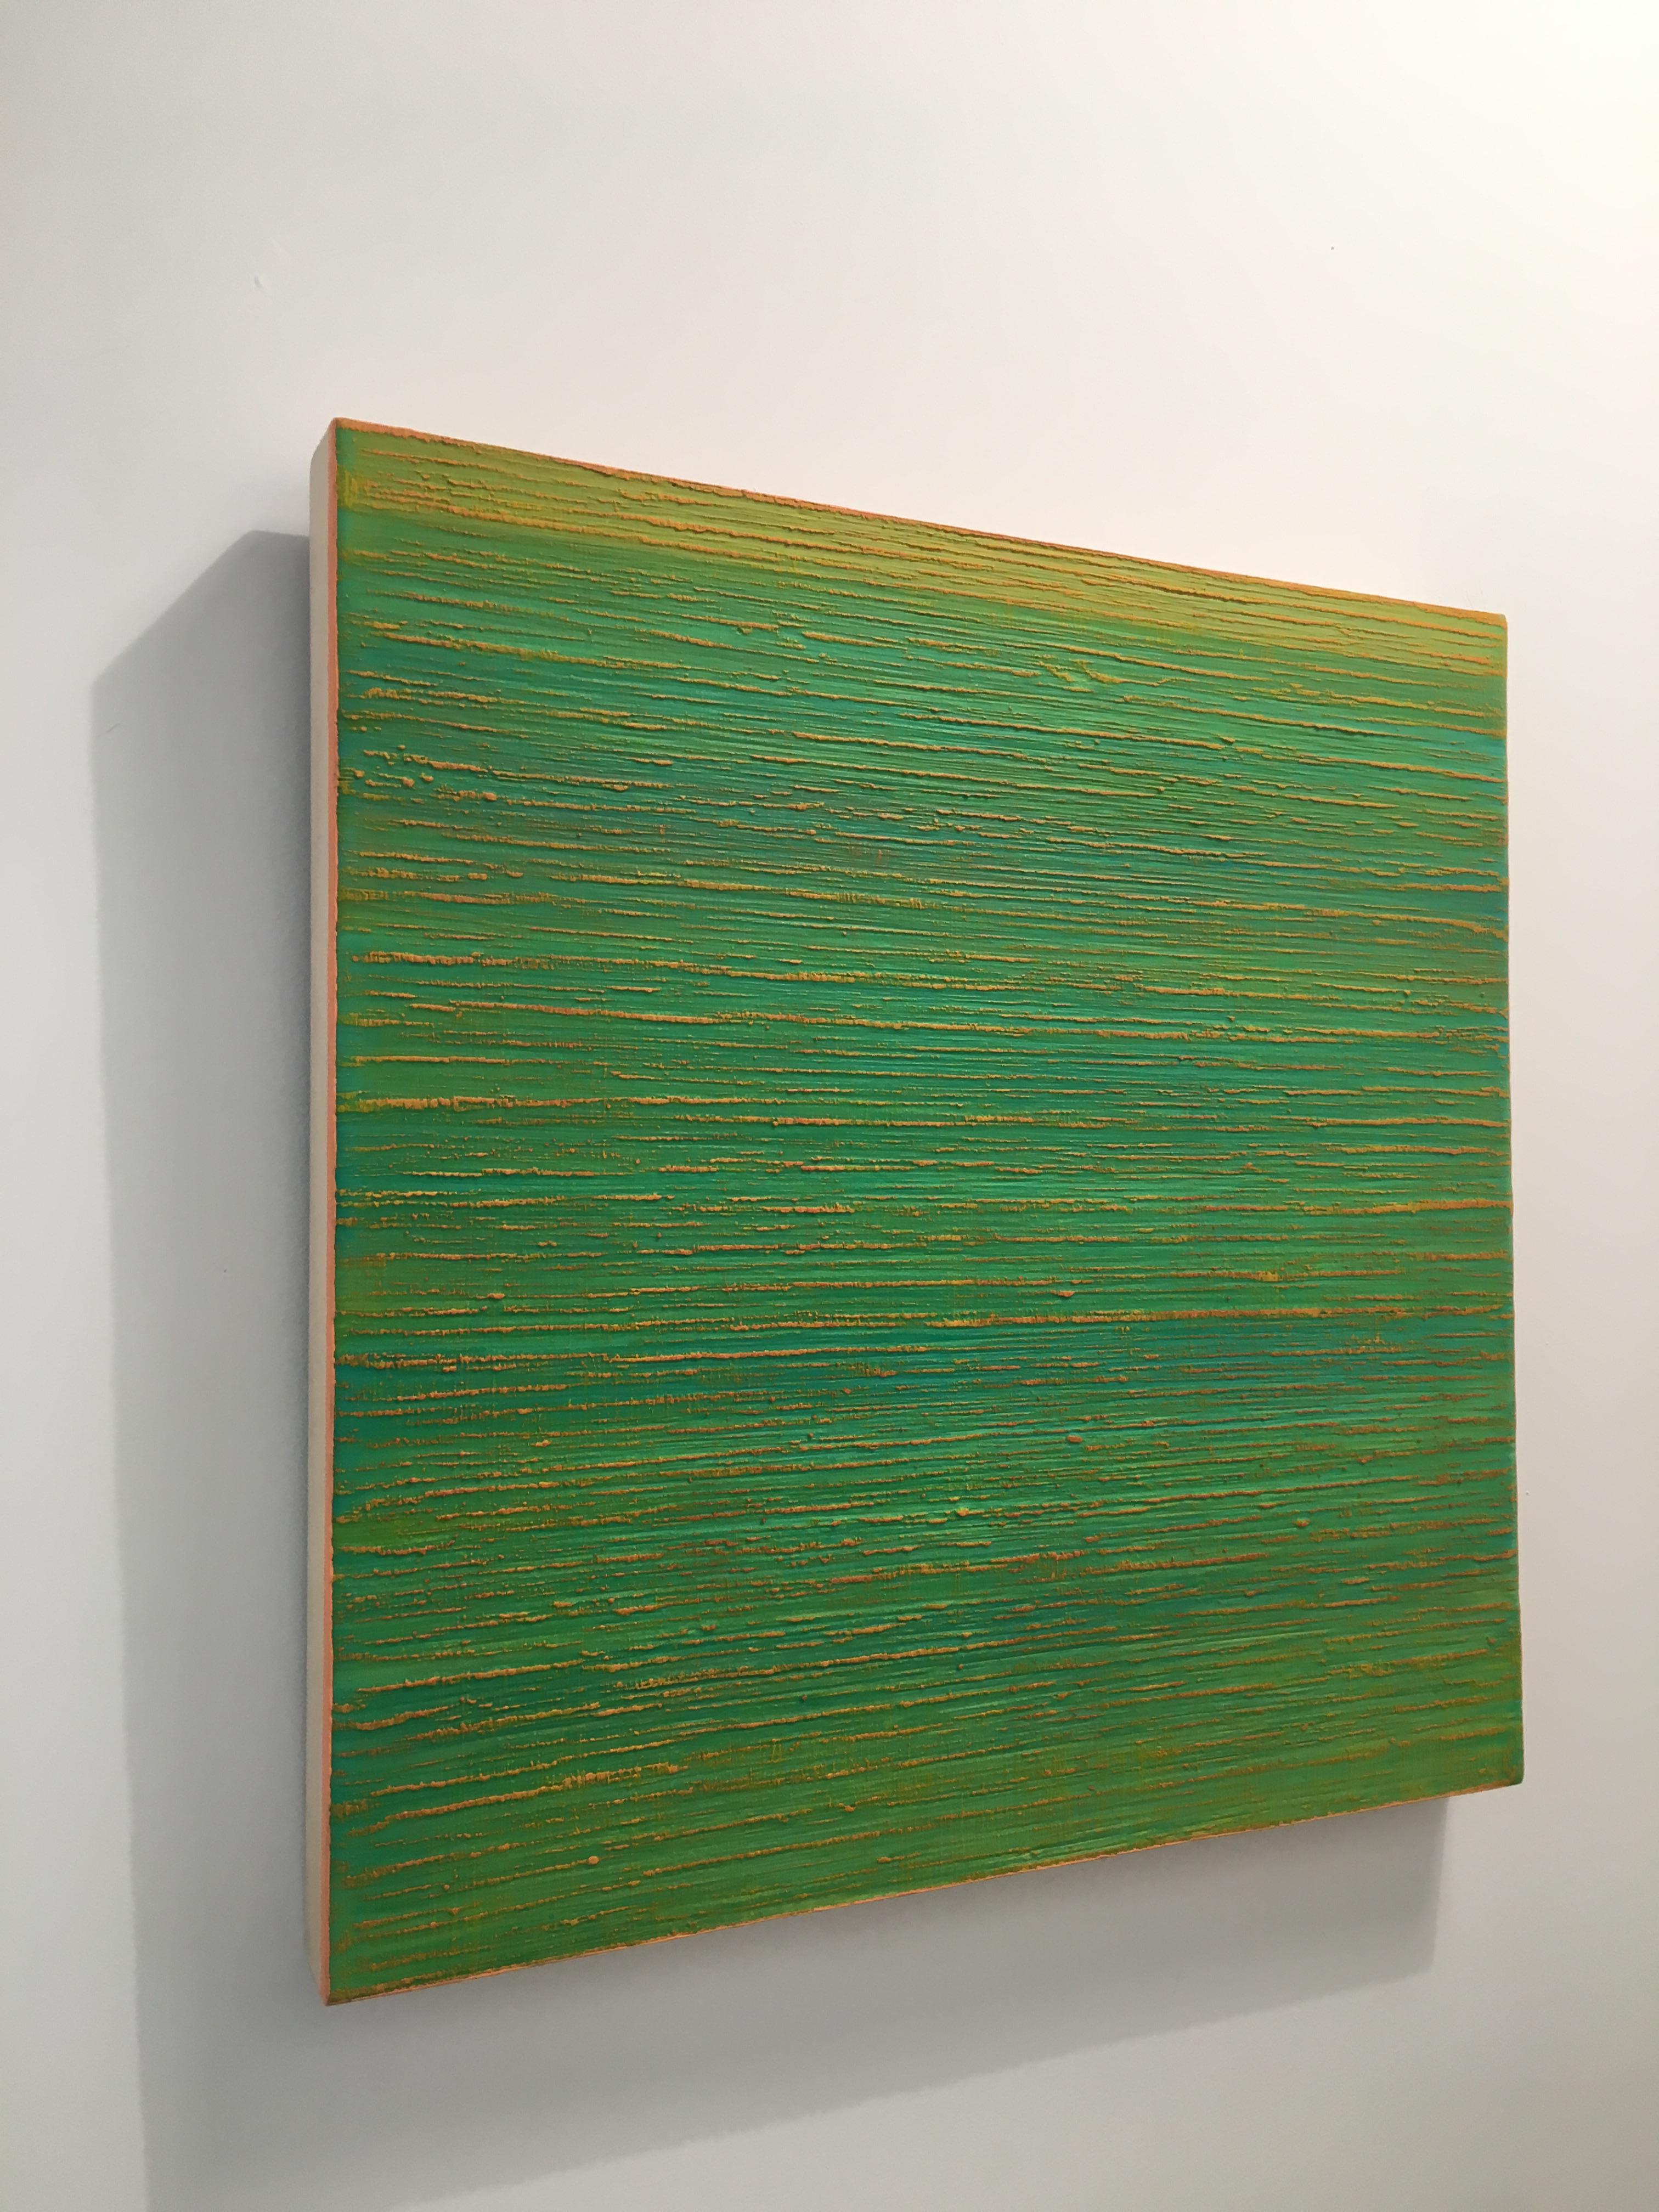 A bright green encaustic (pigmented beeswax) painting on birch panel with yellow in the background and peach along the edges. Signed, dated and titled on verso.

Joanne Mattera’s paintings can be described as lush minimalism, the work is